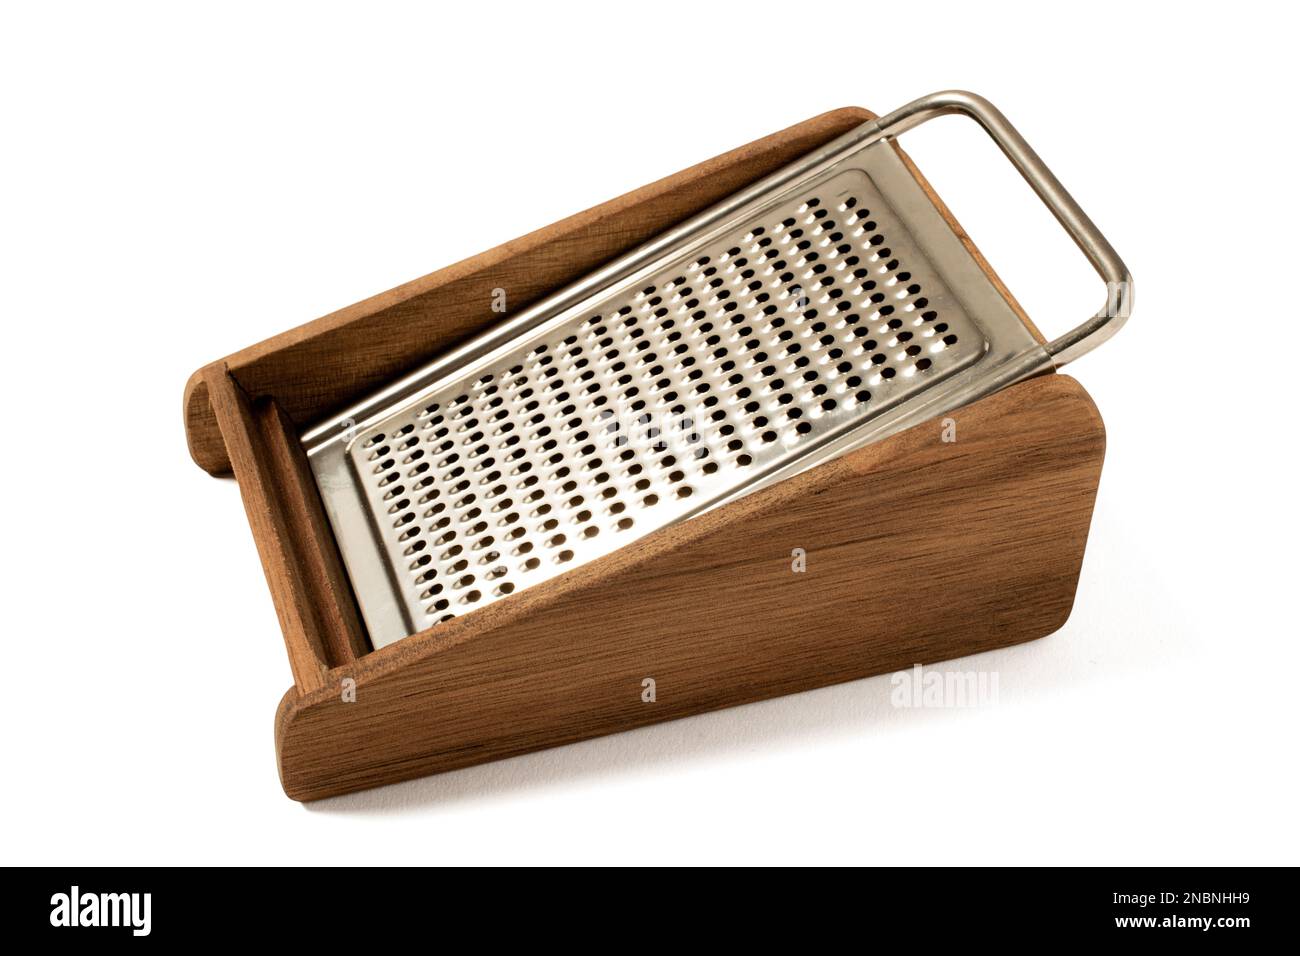 https://c8.alamy.com/comp/2NBNHH9/cheese-grater-food-classic-wooden-and-metal-kitchen-on-white-backgroundvintage-kitchen-utensil-on-white-isolated-copyspaceshredder-overview-2NBNHH9.jpg